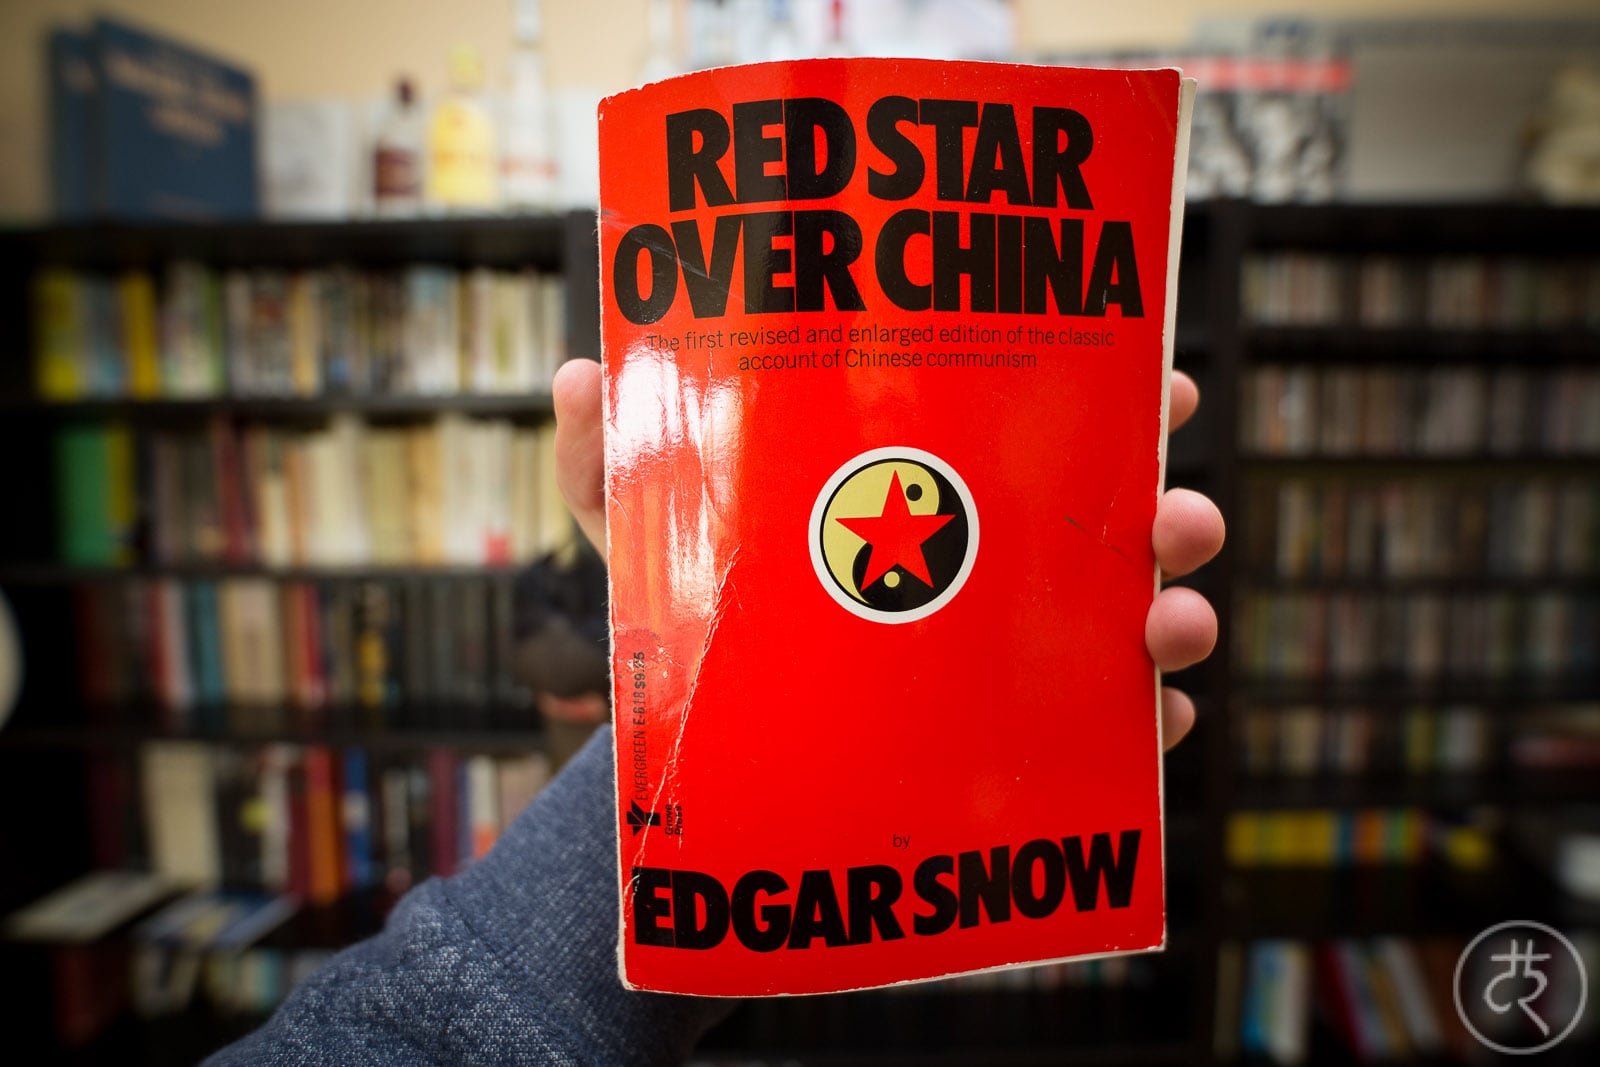 Edgar Snow's "Red Star Over China"